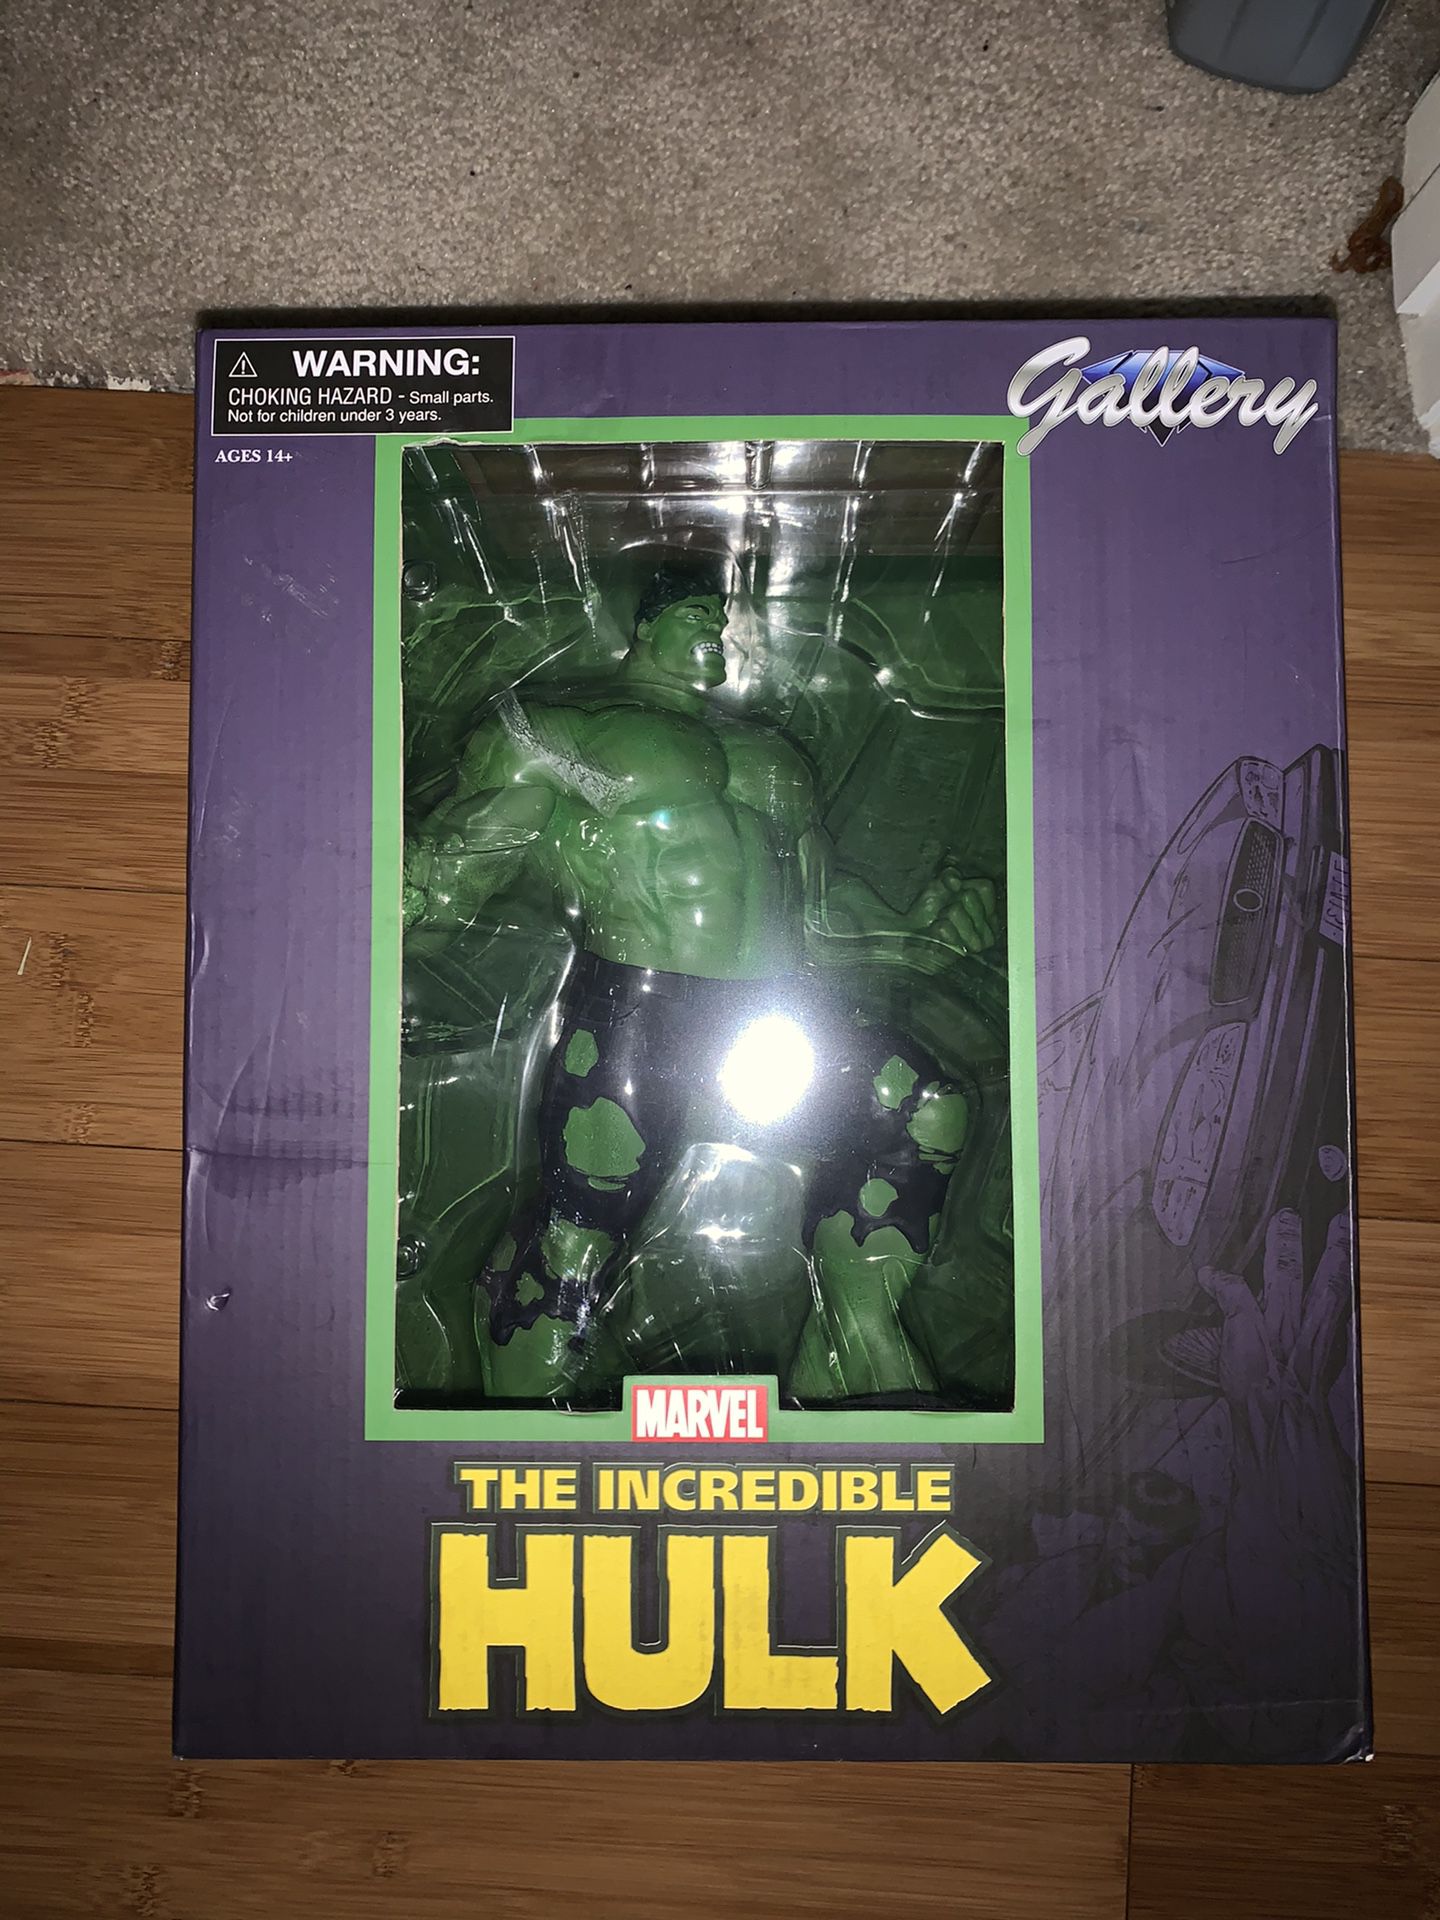 Hulk and dead pool collectible pvc status